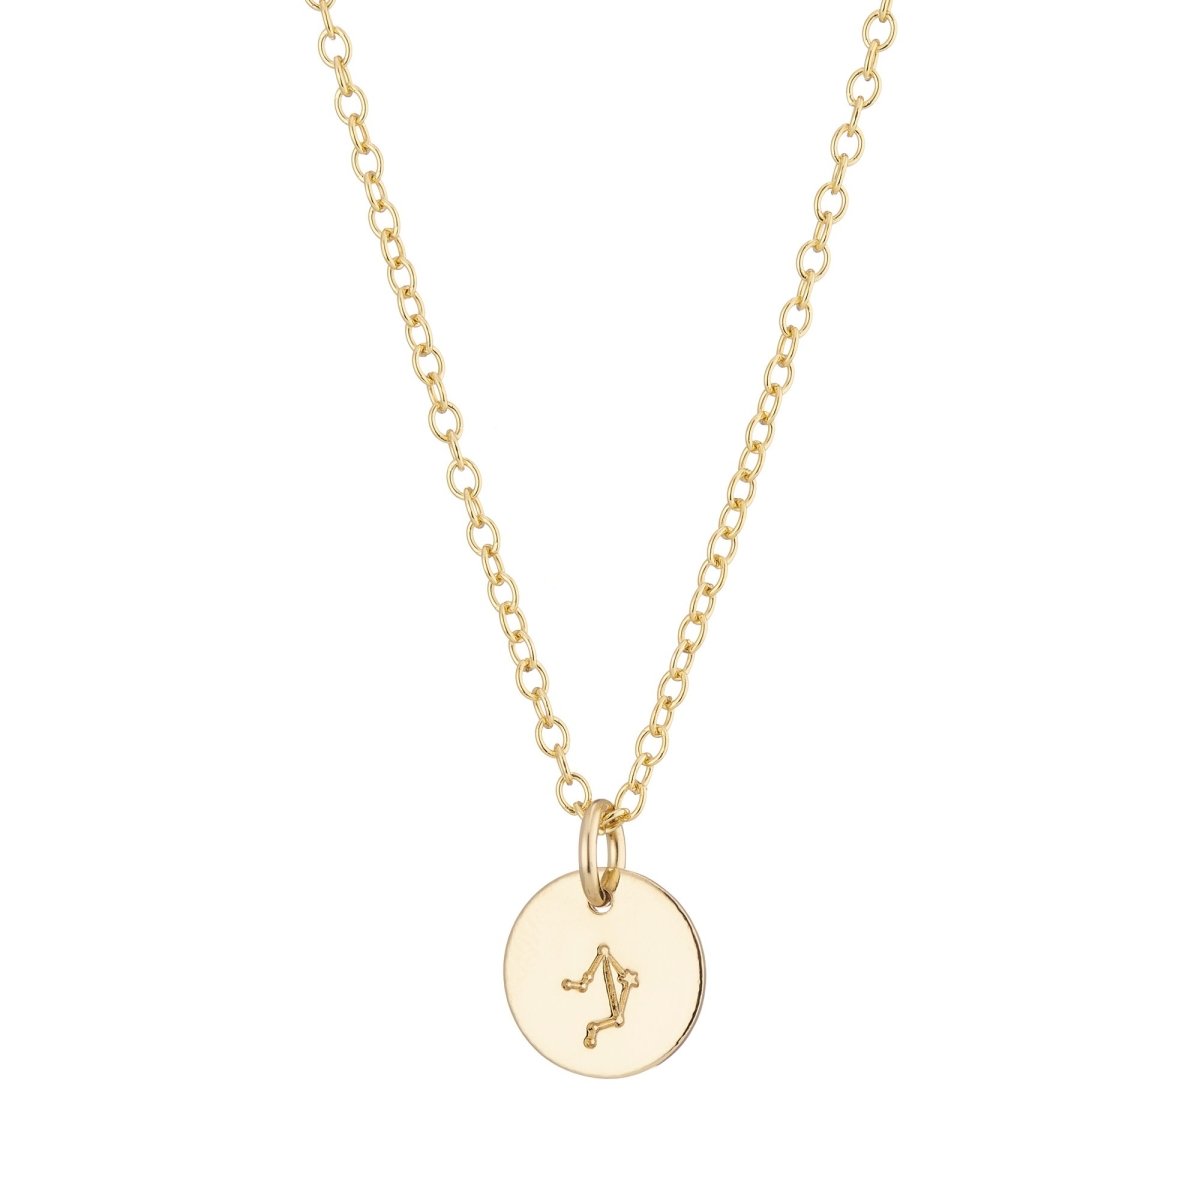 Zodiac Star Sign Charm Necklace in 9ct Gold — The Jewel Shop